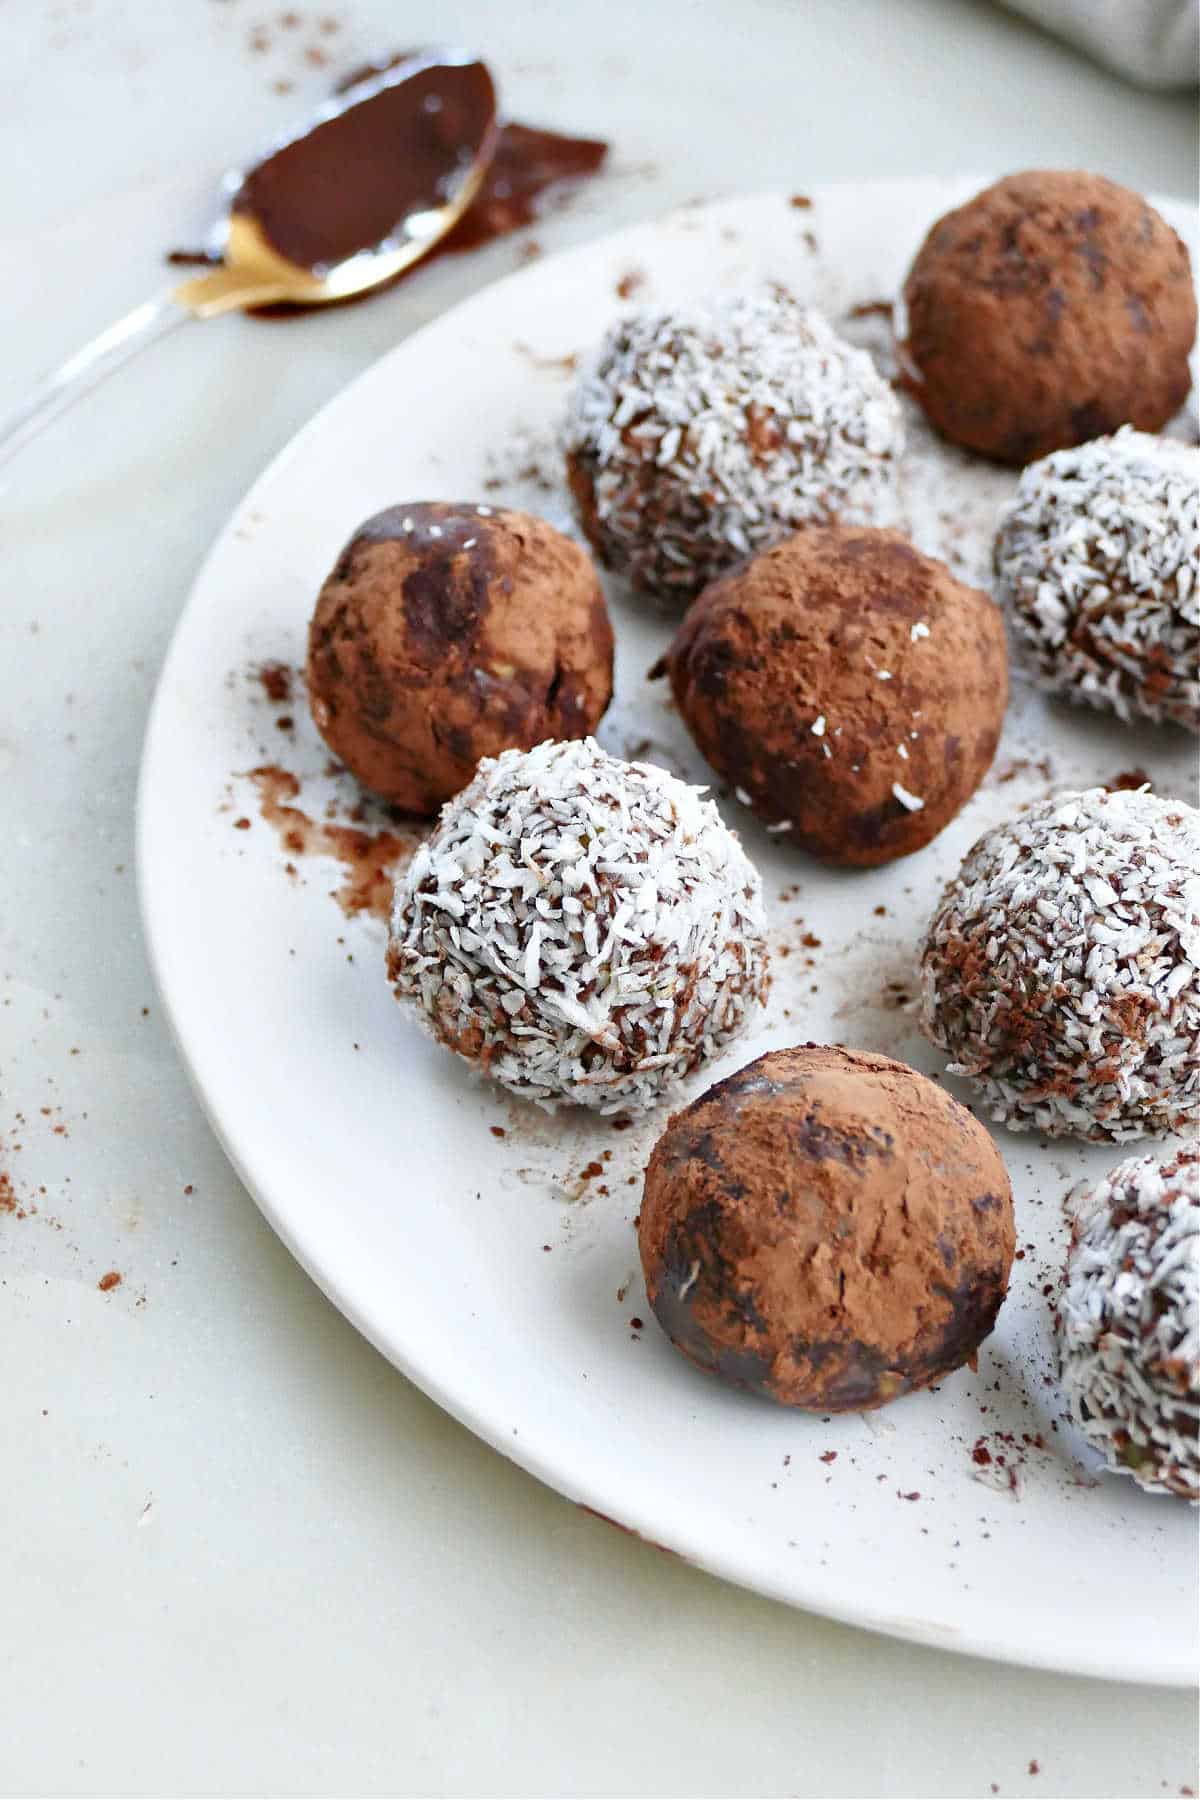 avocado chocolate truffles with cocoa powder and shredded coconut on a plate